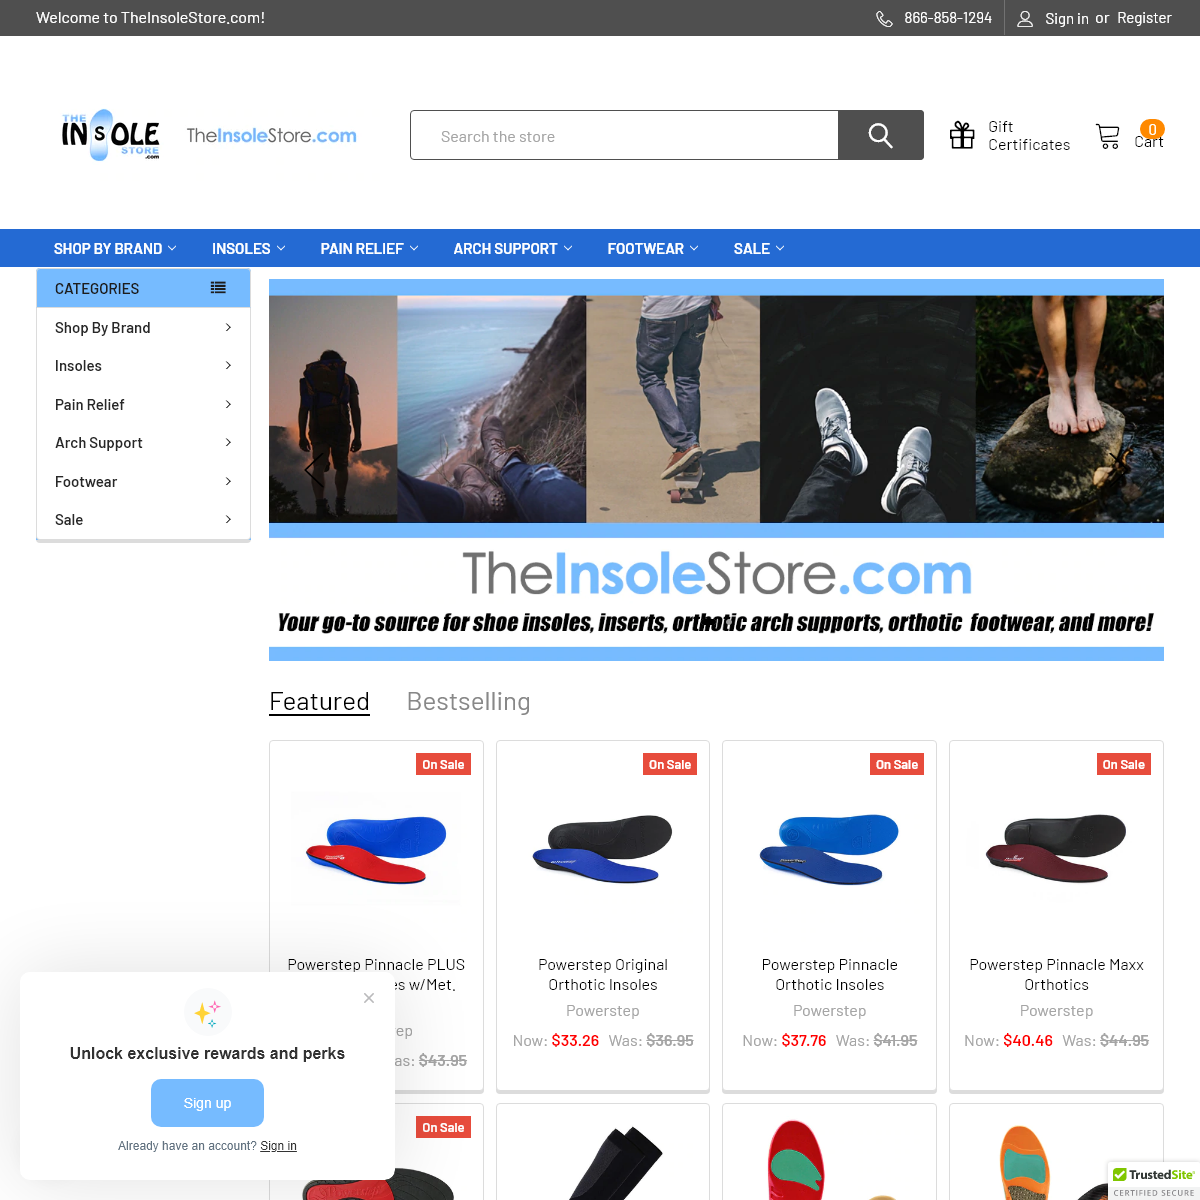 A complete backup of theinsolestore.com